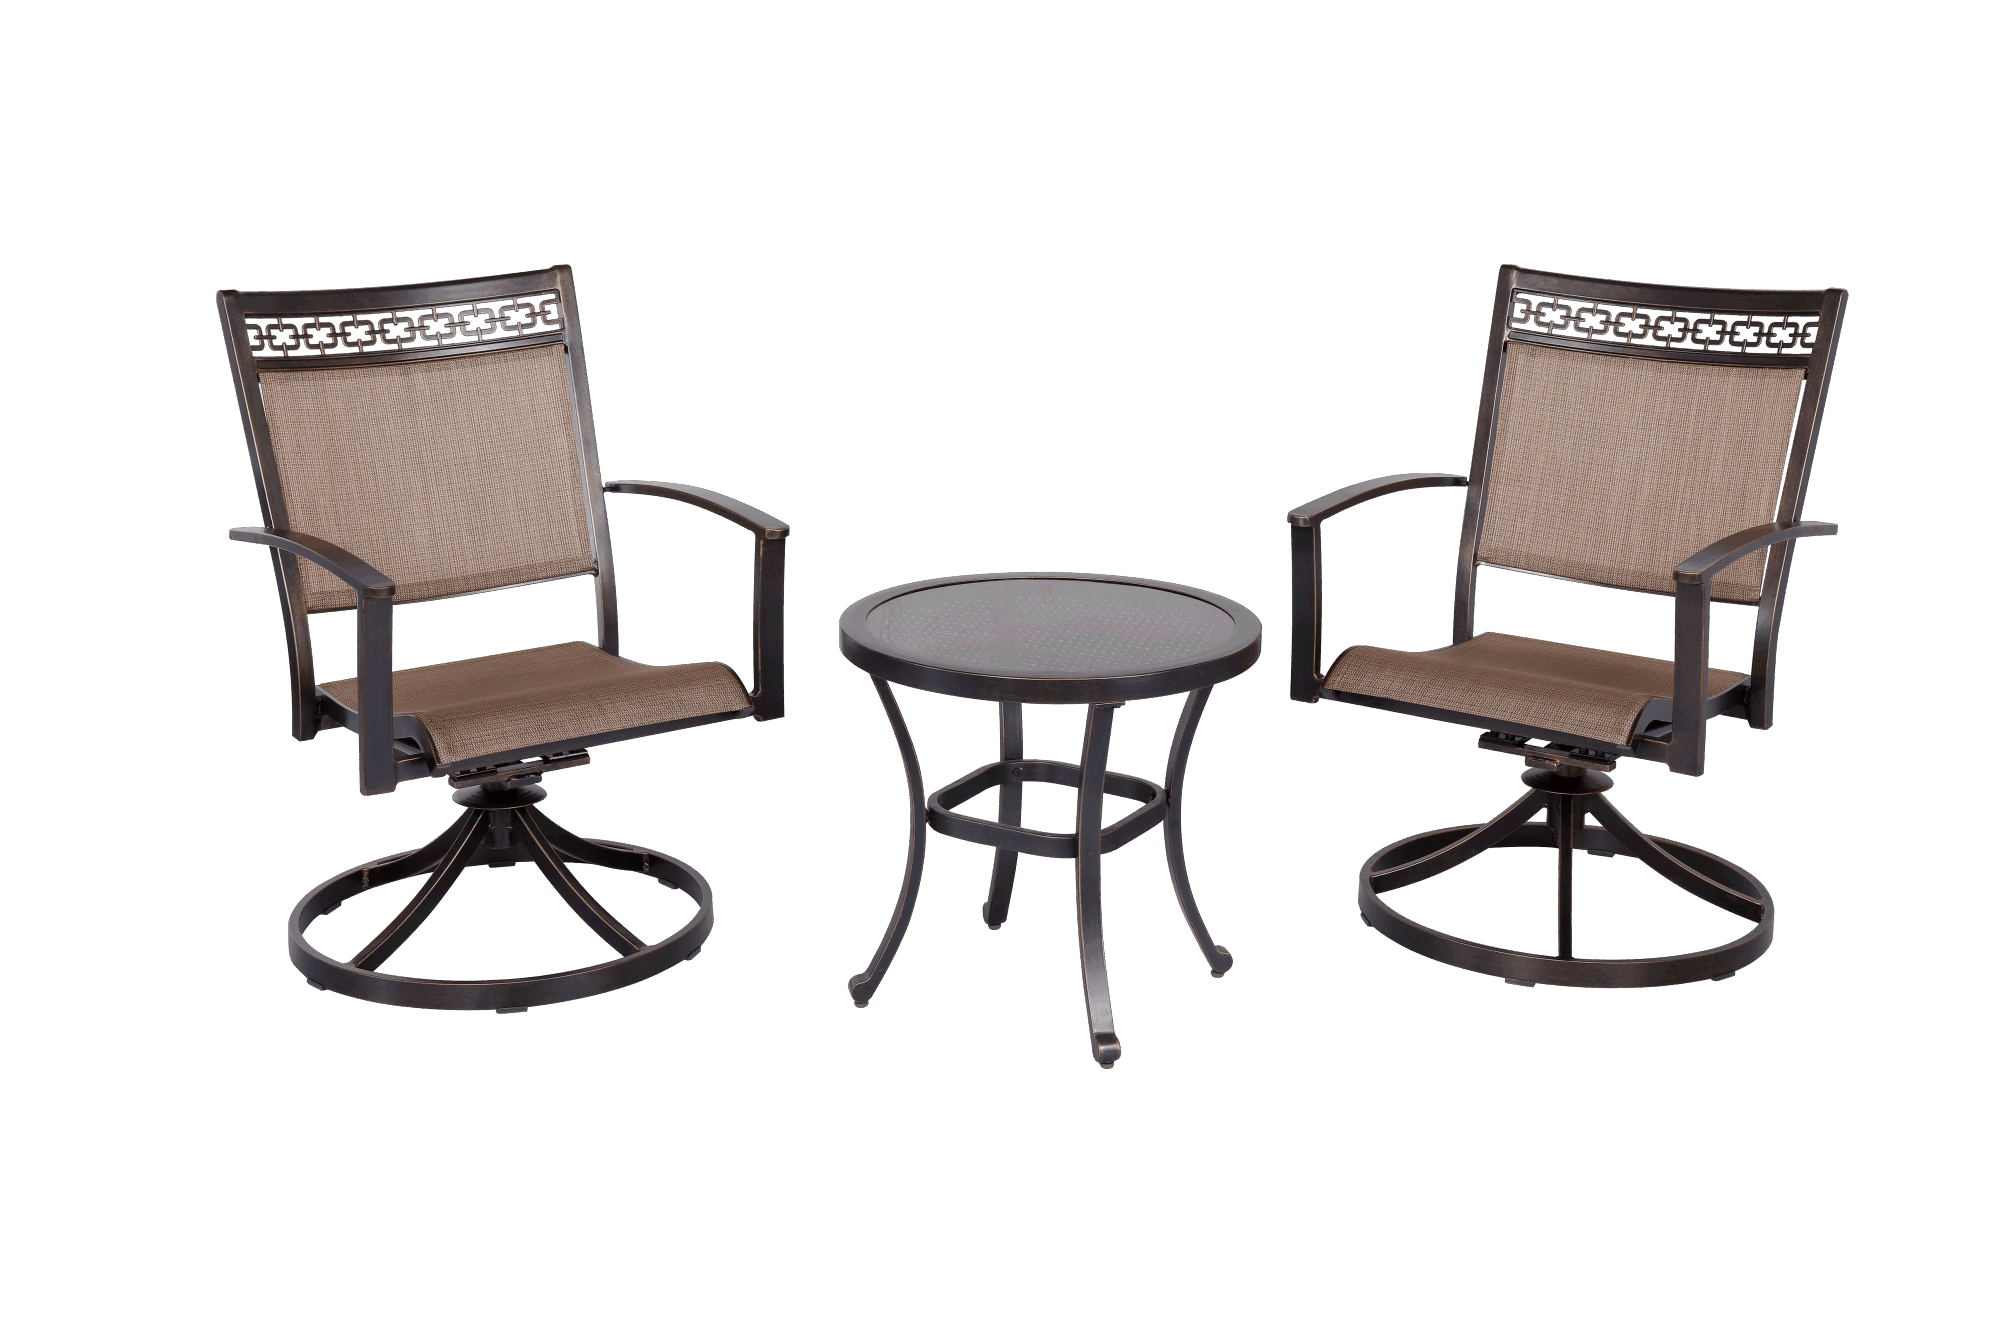 3 Piece Bistro Set w/ Tempered Glass Top Dining Table & Swivel Rocker Chairs